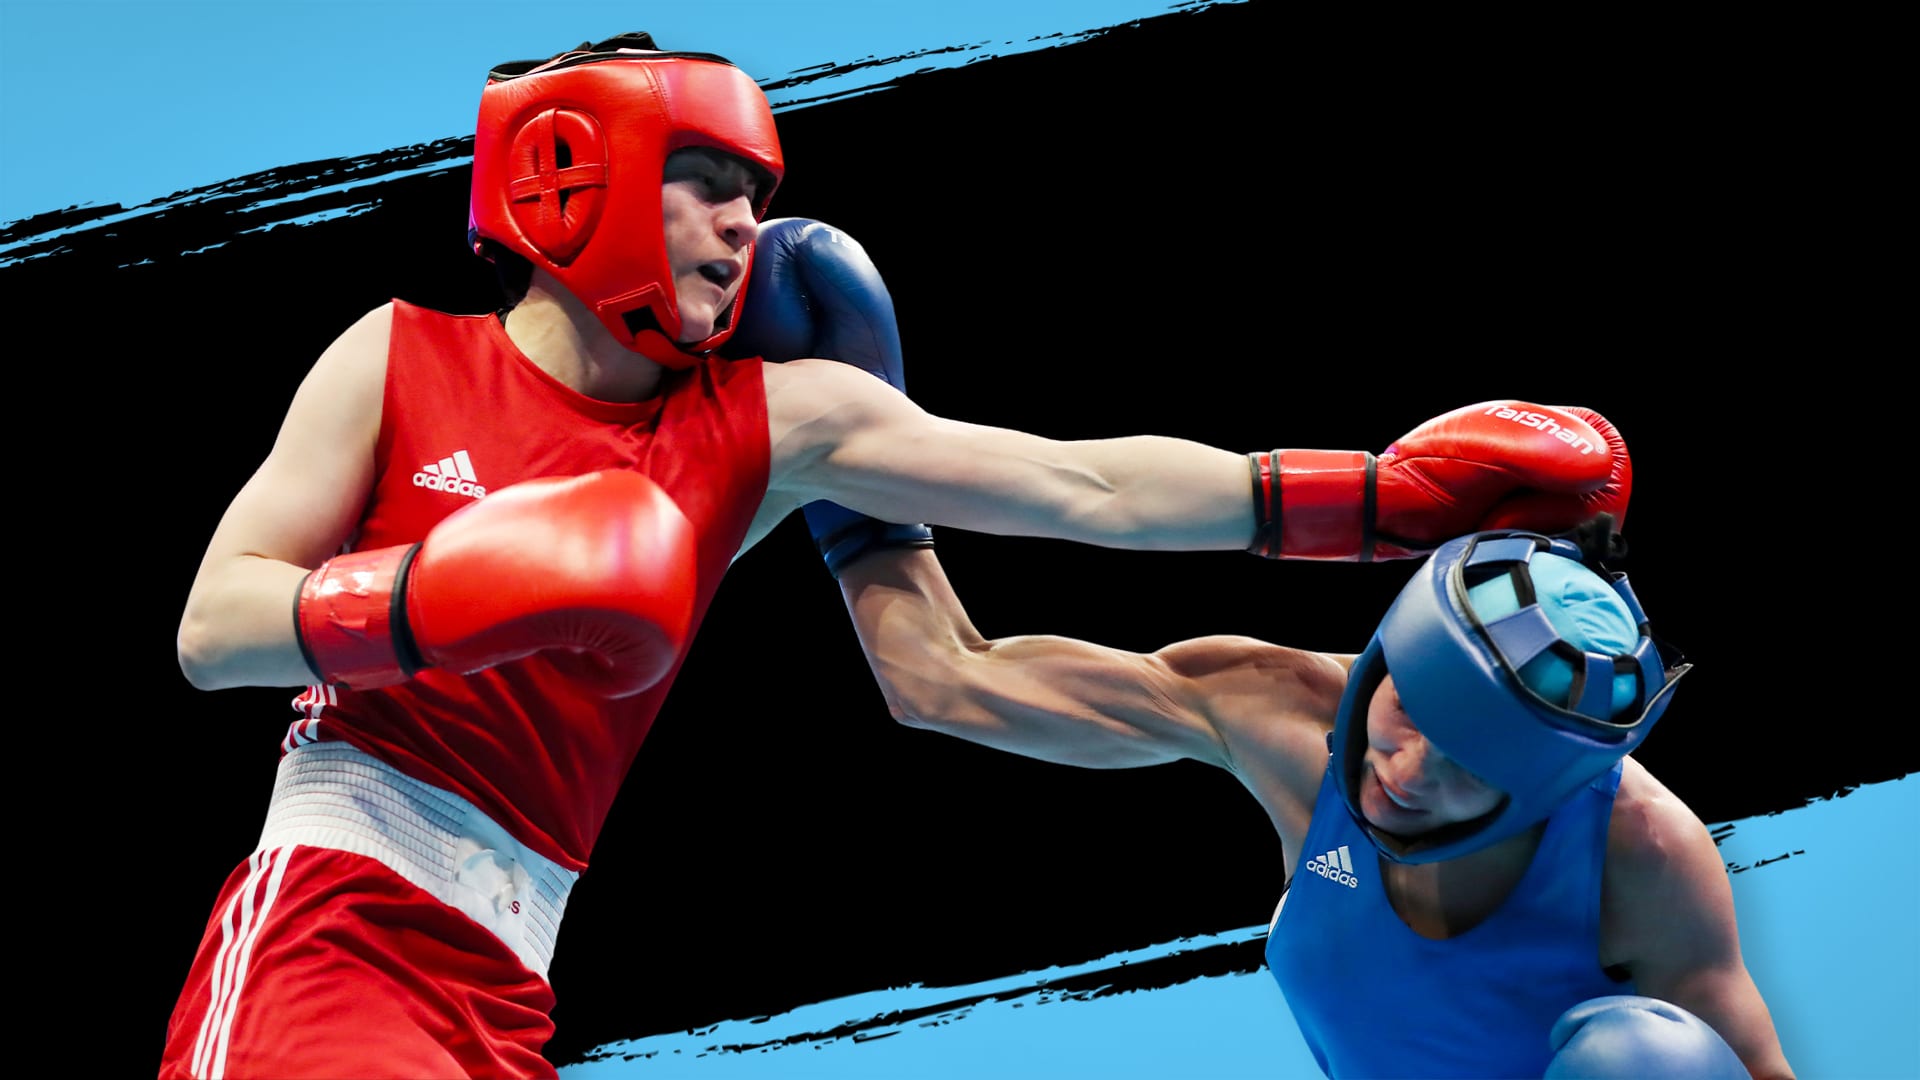 Tokyo 2020 Olympic boxing qualifiers